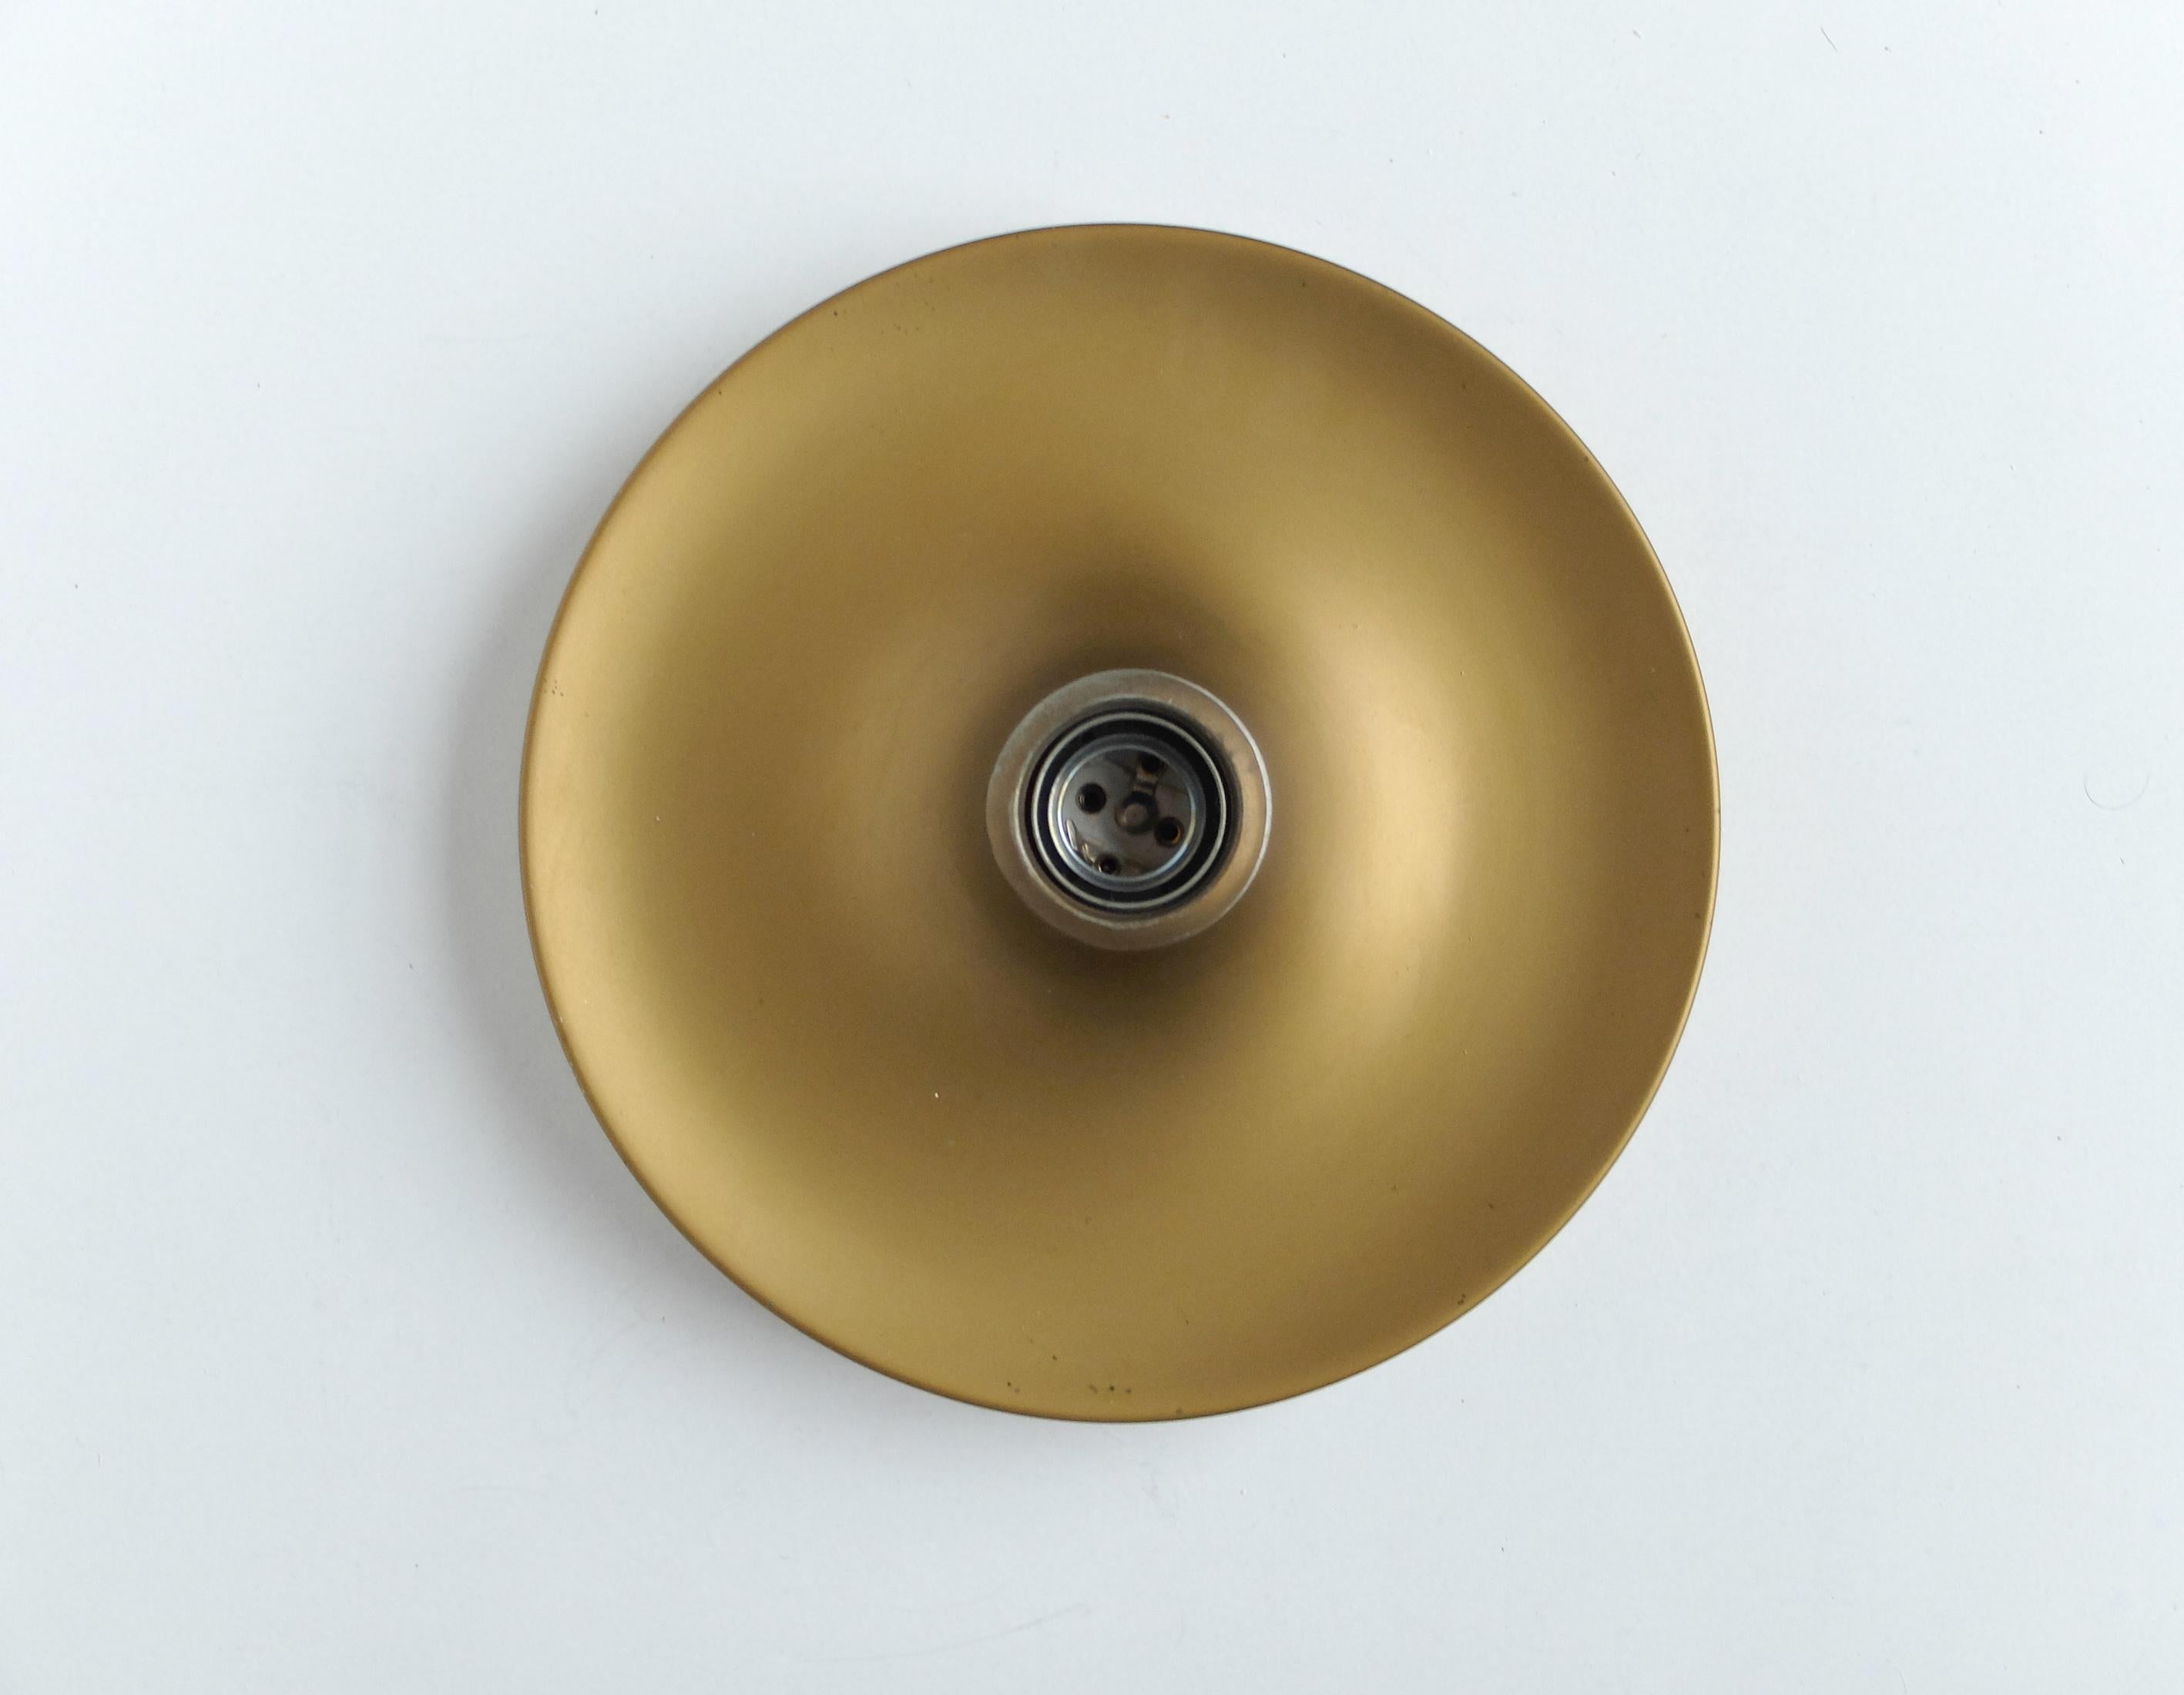 Aluminum Small Charlotte Perriand Flush Sconce Matte Gold Disc Wall Light, Germany, 1960s For Sale